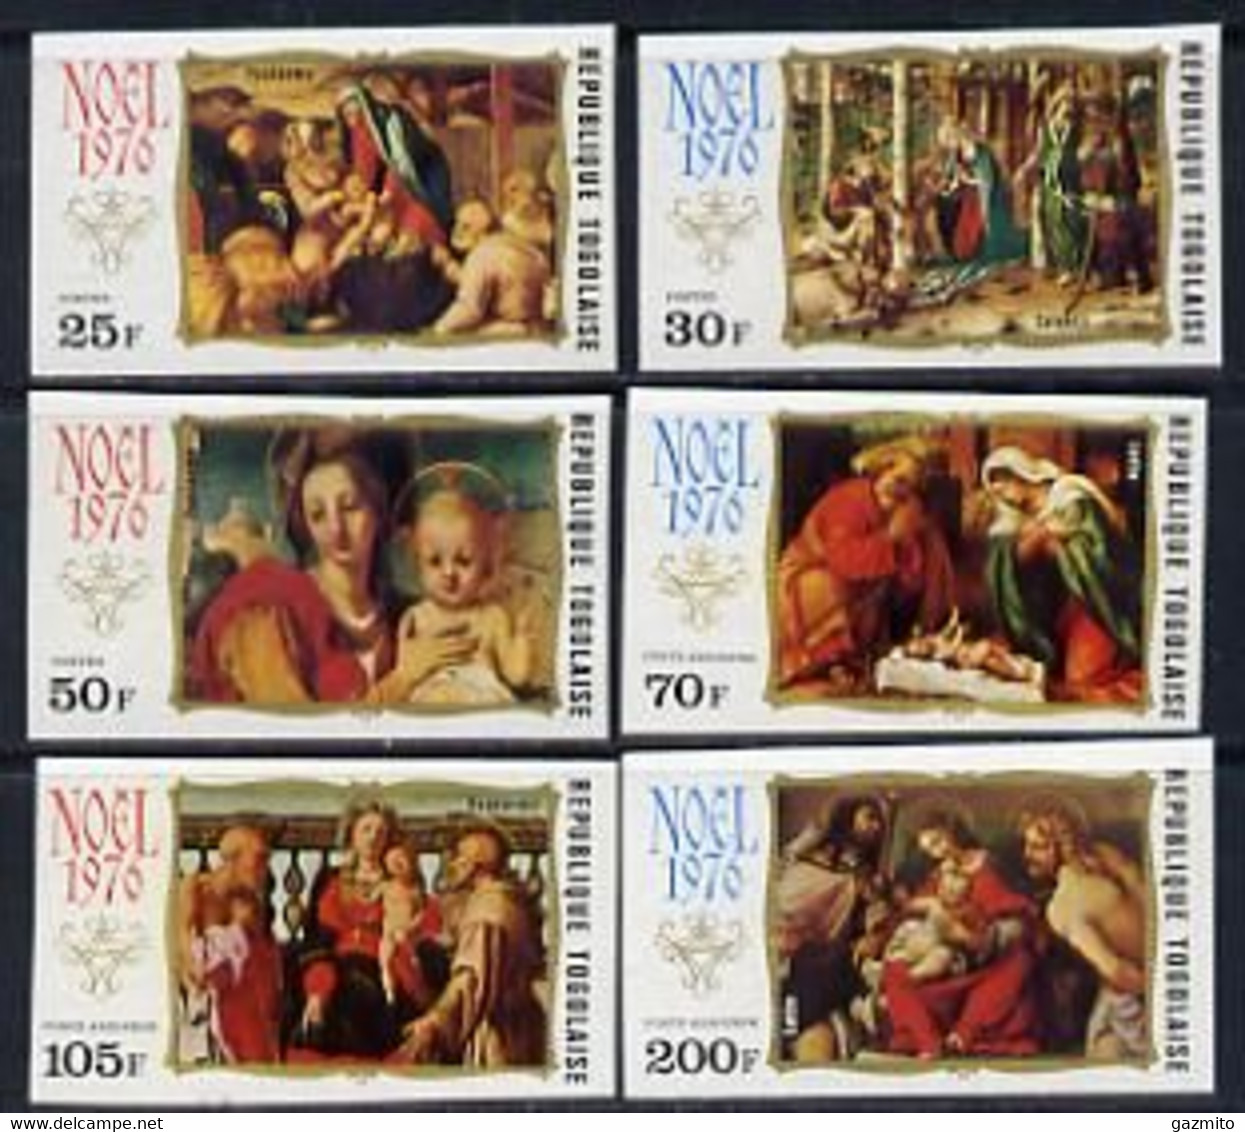 Togo 1976, Christmas, Painting By Carrucci, Crivelli, Lotto, 6val IMPERFORATED - Schilderijen